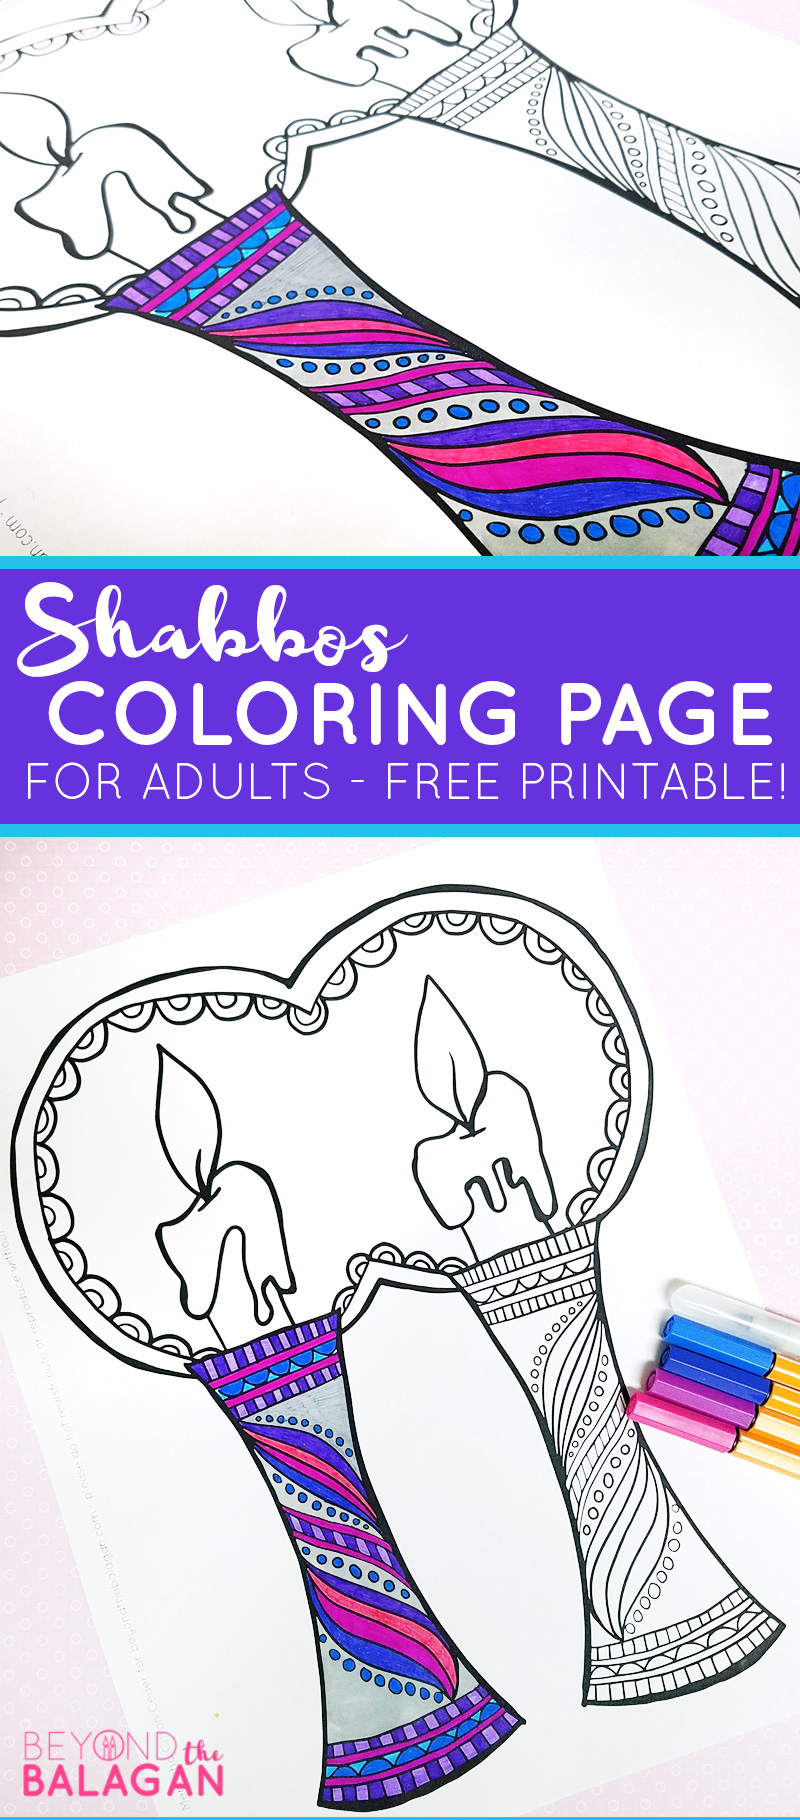 Download this free printable shabbat coloring page for adults big kids or teens! TAke a break from your shabbos preparation and relax a little! #shabbat #shabbos #Jewish #judaism 